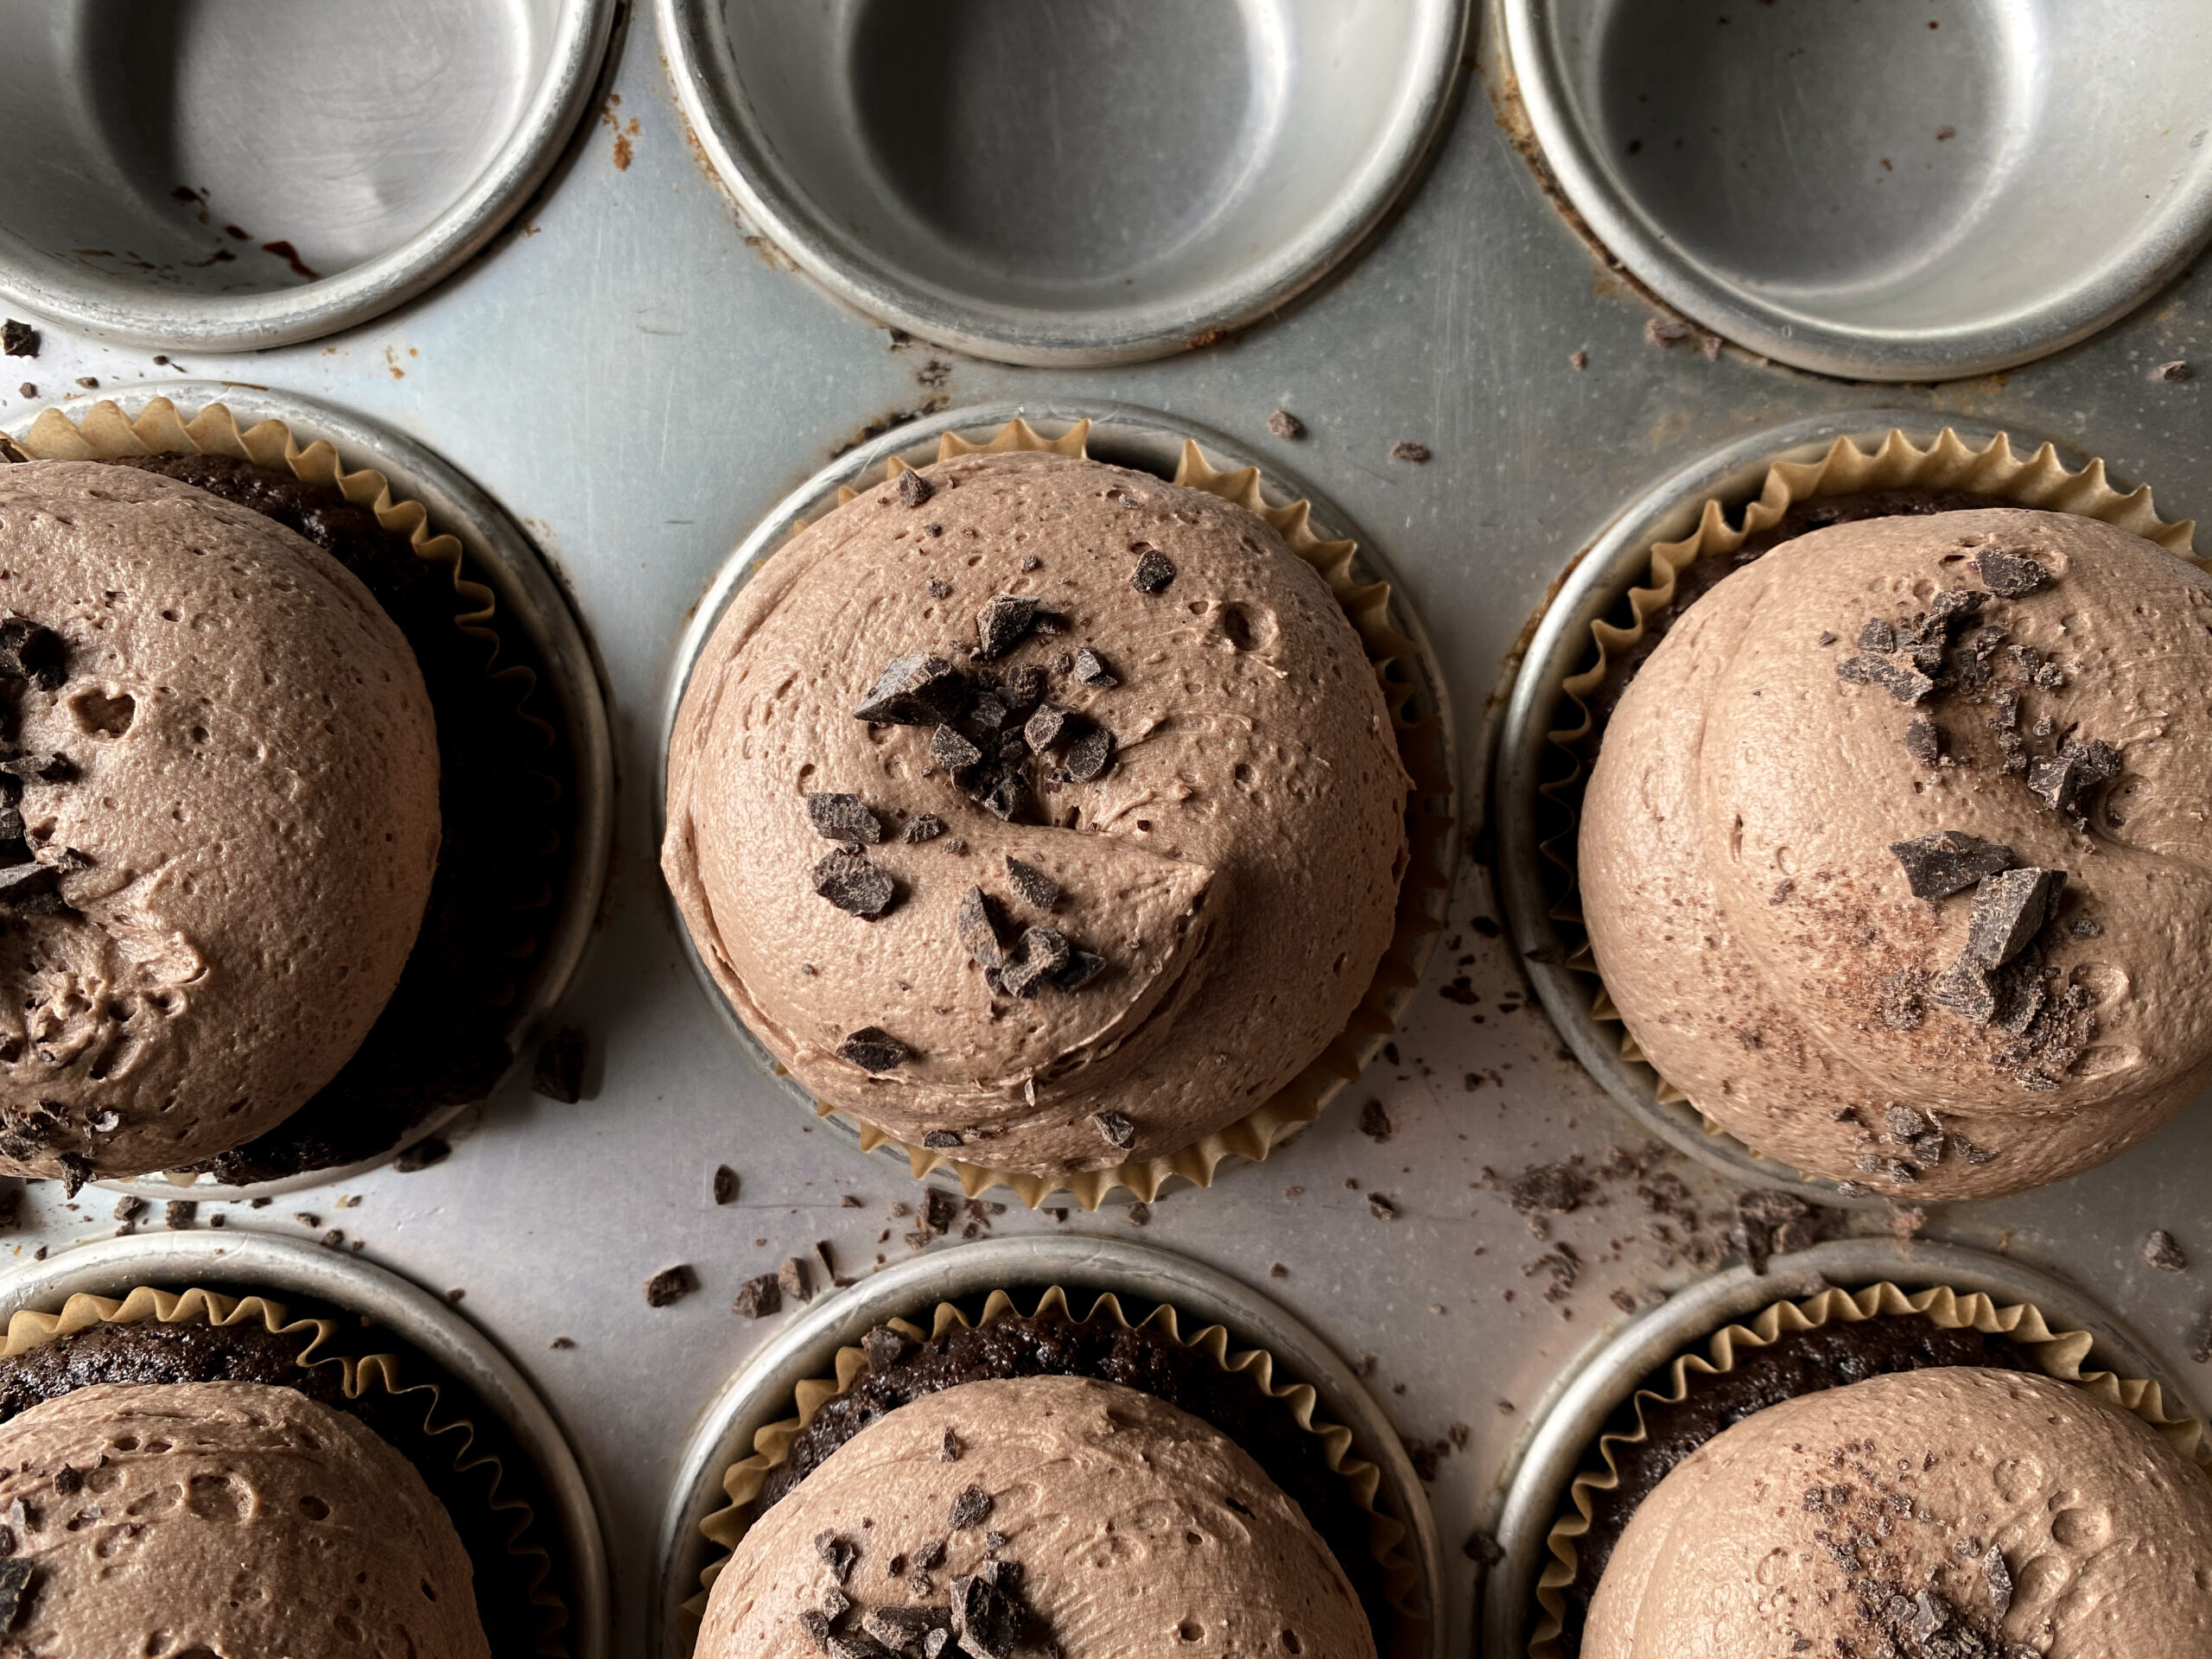 Candice Hunsinger, PERFECT CHOCOLATE CUPCAKES, organic baker, a life made from scratch organic, organic chocolate cupcakes, chocolate buttercream frosting recipe, chocolate cupcake recipe